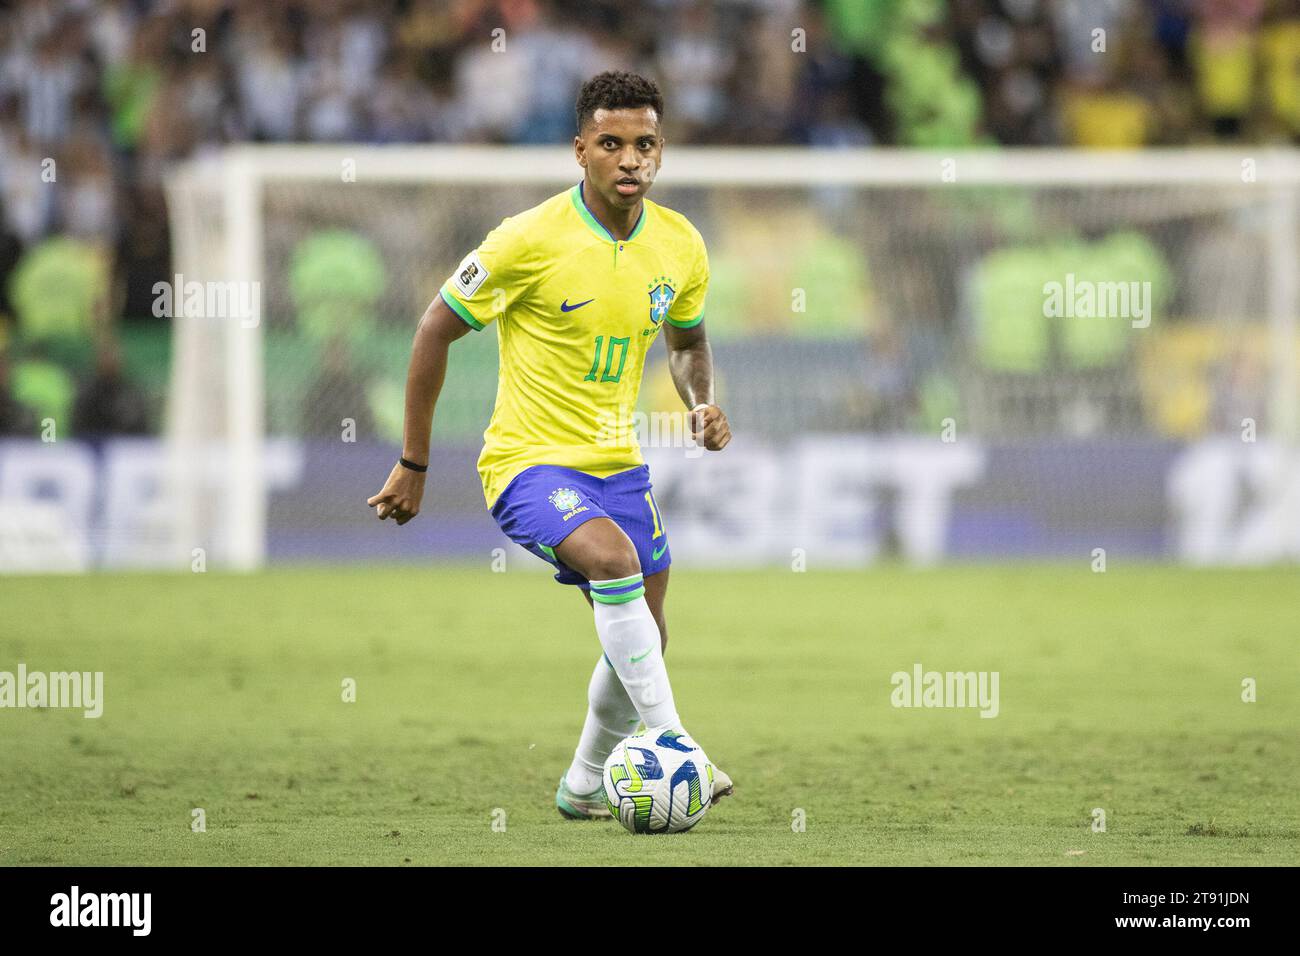 Rio De Janeiro, Brazil. 21st Nov, 2023. RIO DE JANEIRO, BRAZIL - NOVEMBER 21: Rodrygo of Brazil controls the ball during a match between Brazil and Argentina as part of 2026 FIFA World Cup South American Qualification at Maracana Stadium on November 21, 2023 in Rio de Janeiro, Brazil. (Photo by Wanderson Oliveira/PxImages) Credit: Px Images/Alamy Live News Stock Photo